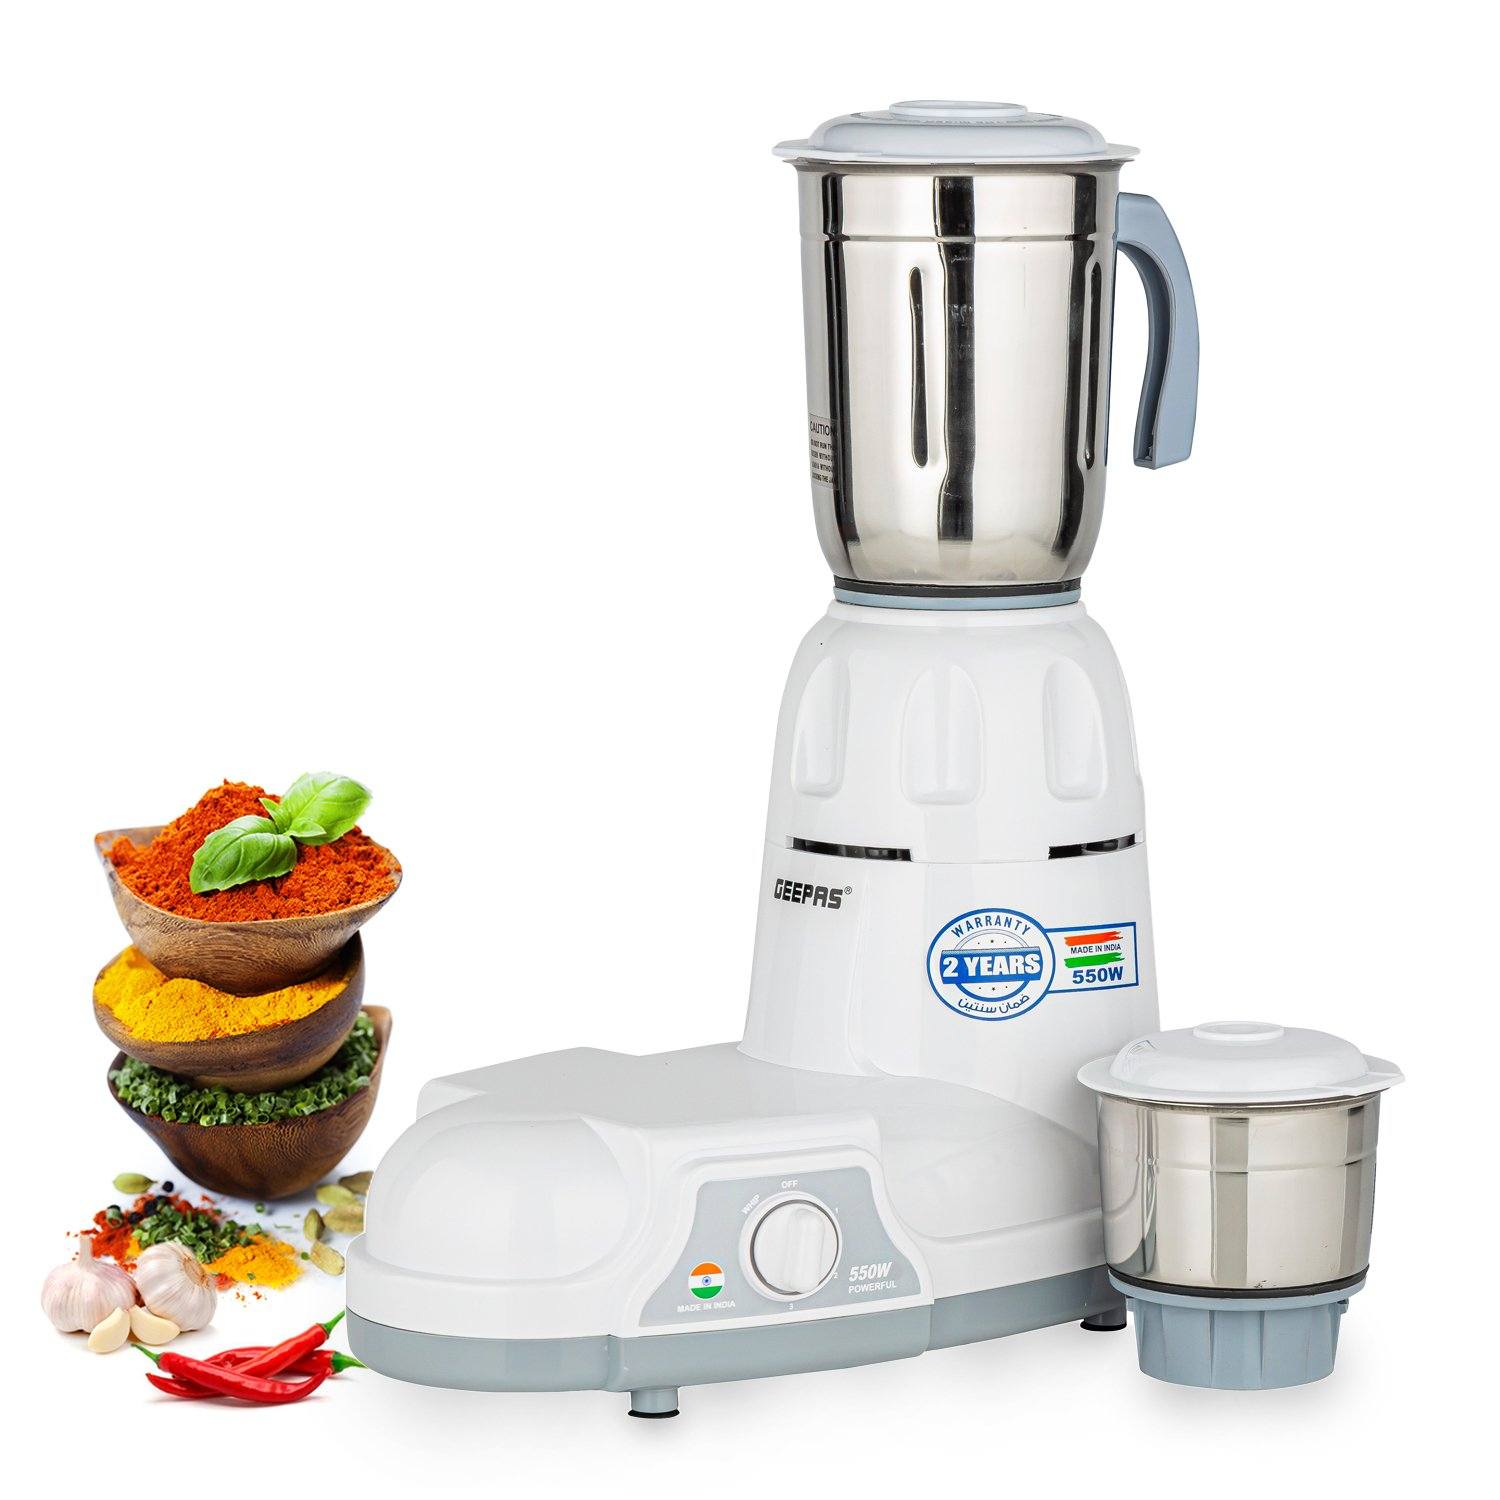 Photos - Mixer Geepas 2-In-1 Three-Speed Wet and Dry Indian  Grinder 550W GSB5456 